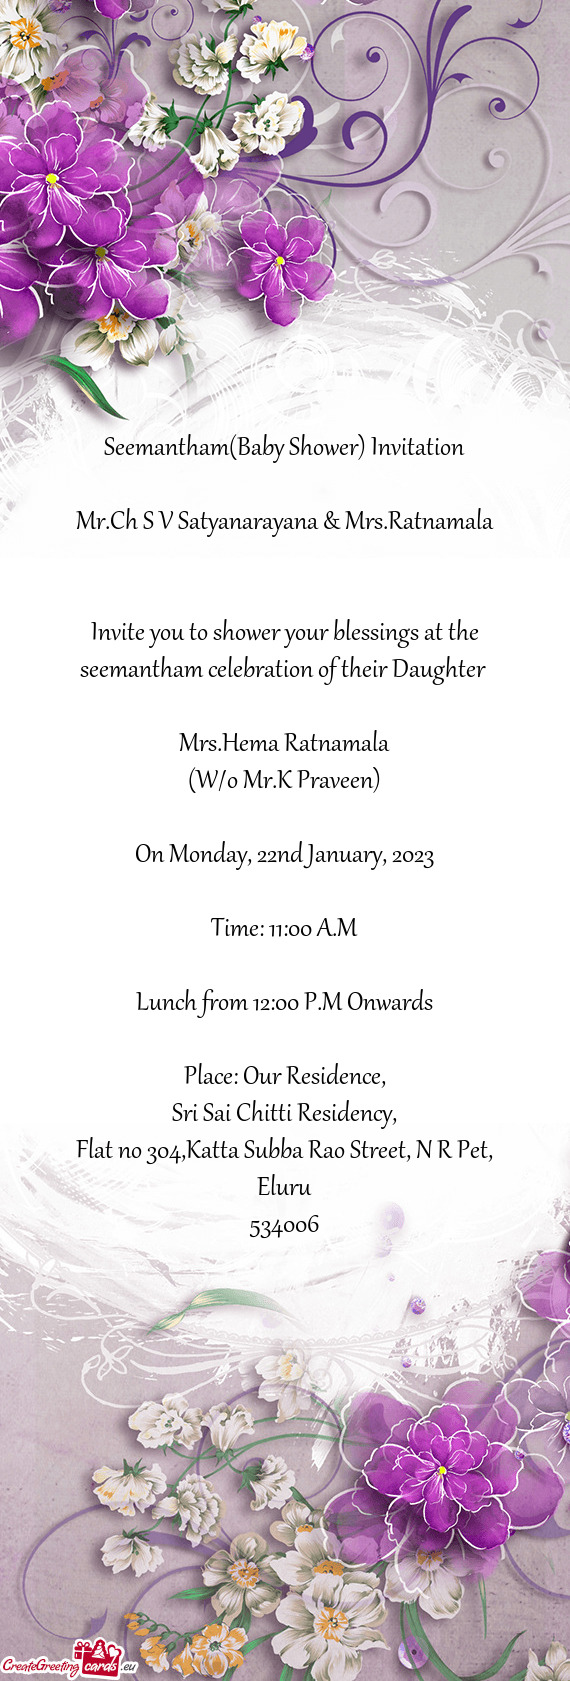 Invite you to shower your blessings at the seemantham celebration of their Daughter